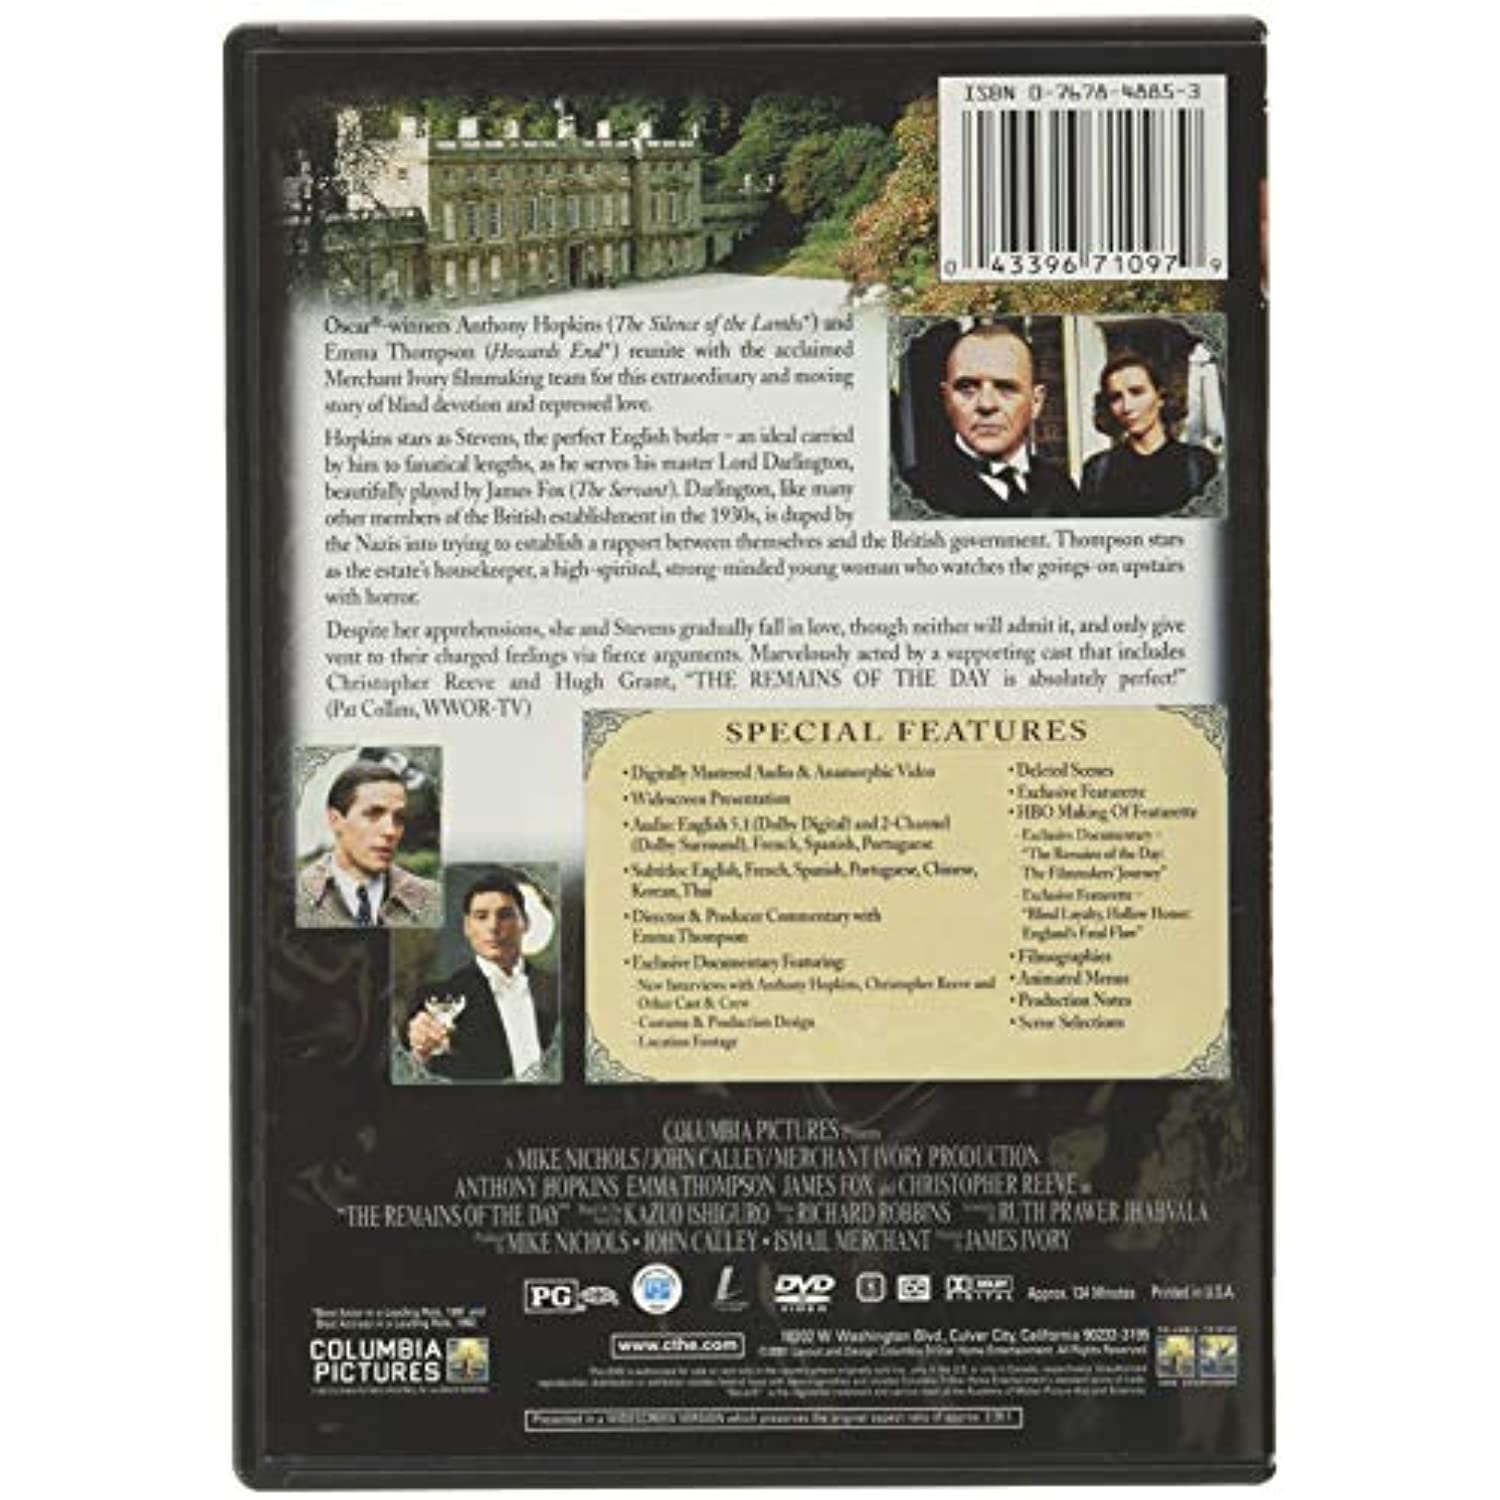 The Remains of the Day (DVD), Sony Pictures, Drama - image 2 of 3